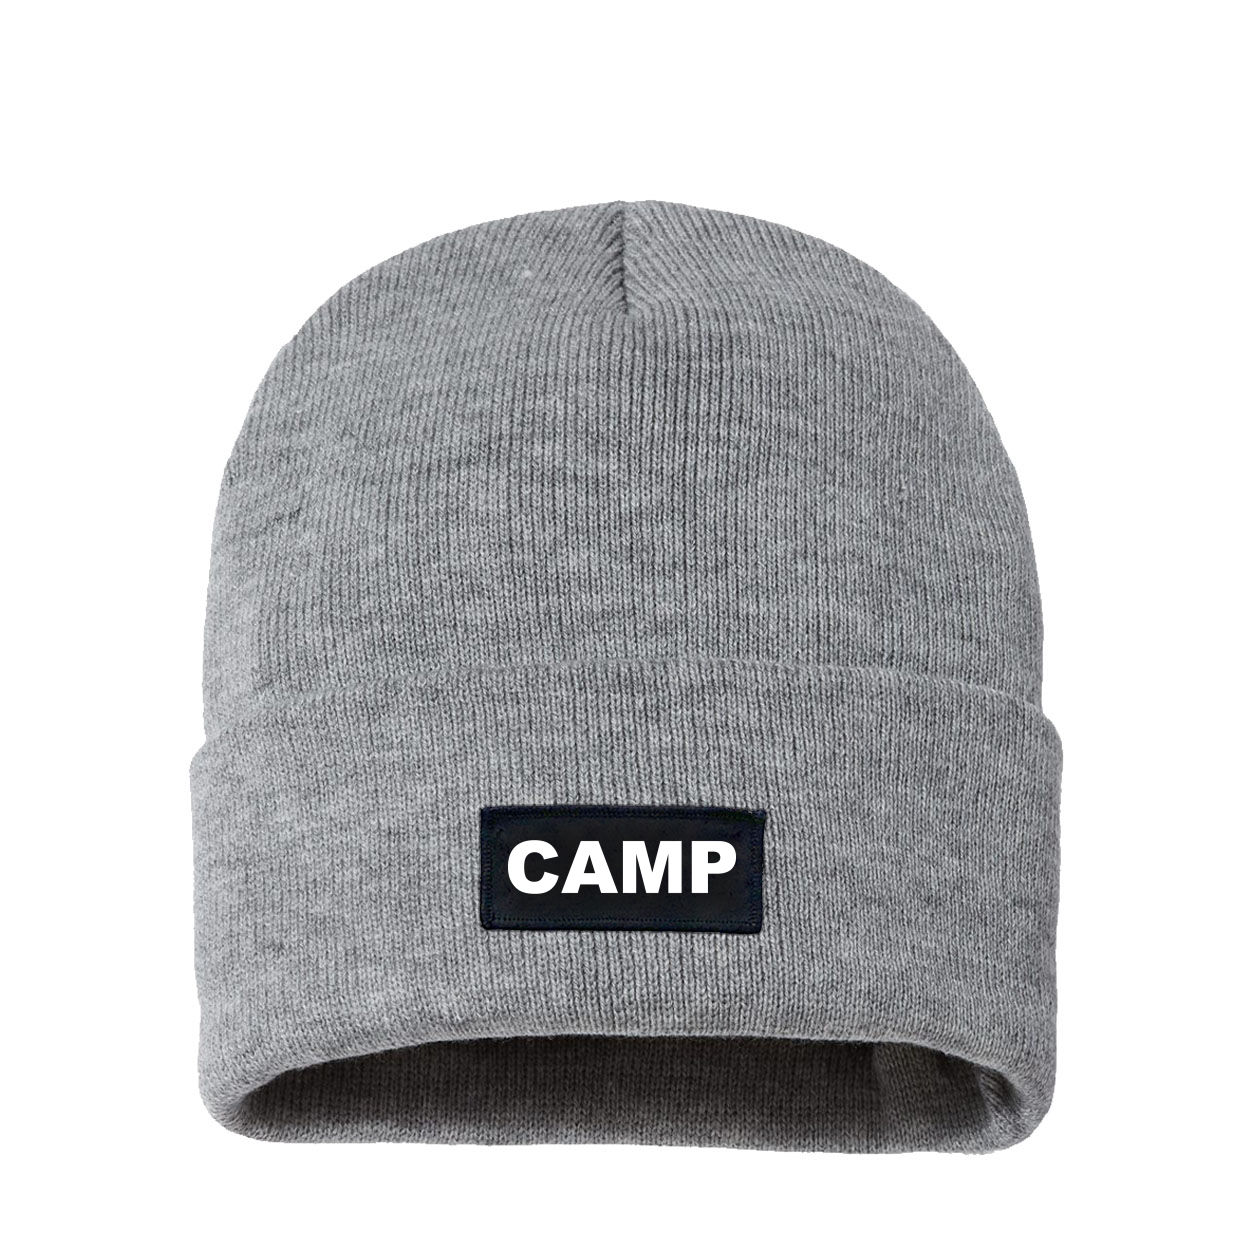 Camp Brand Logo Night Out Woven Patch Sherpa Lined Cuffed Beanie Heather Gray